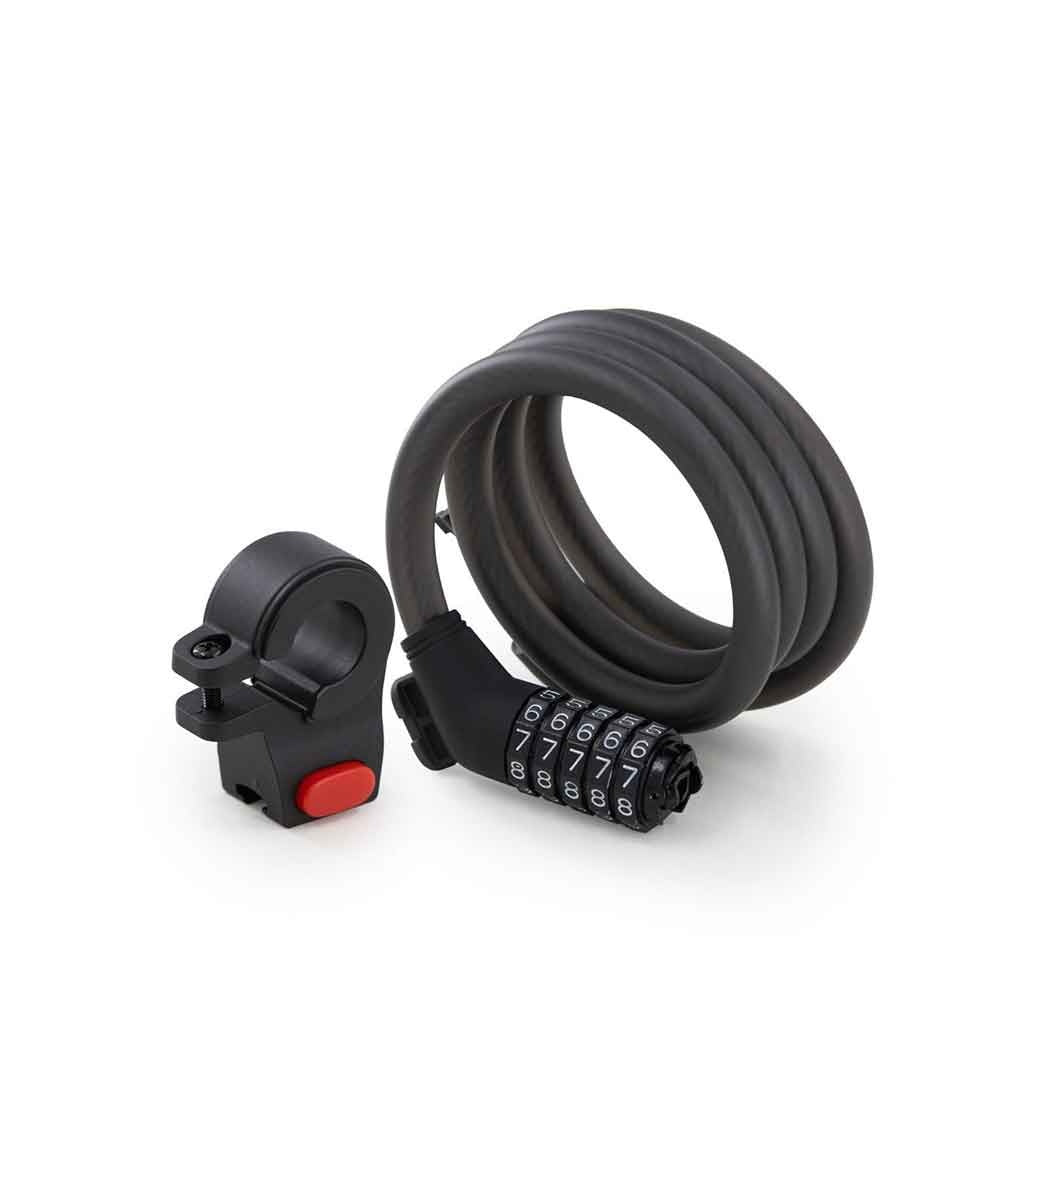 Scooter Ninebot Lock for Xiaomi and other scooters Black